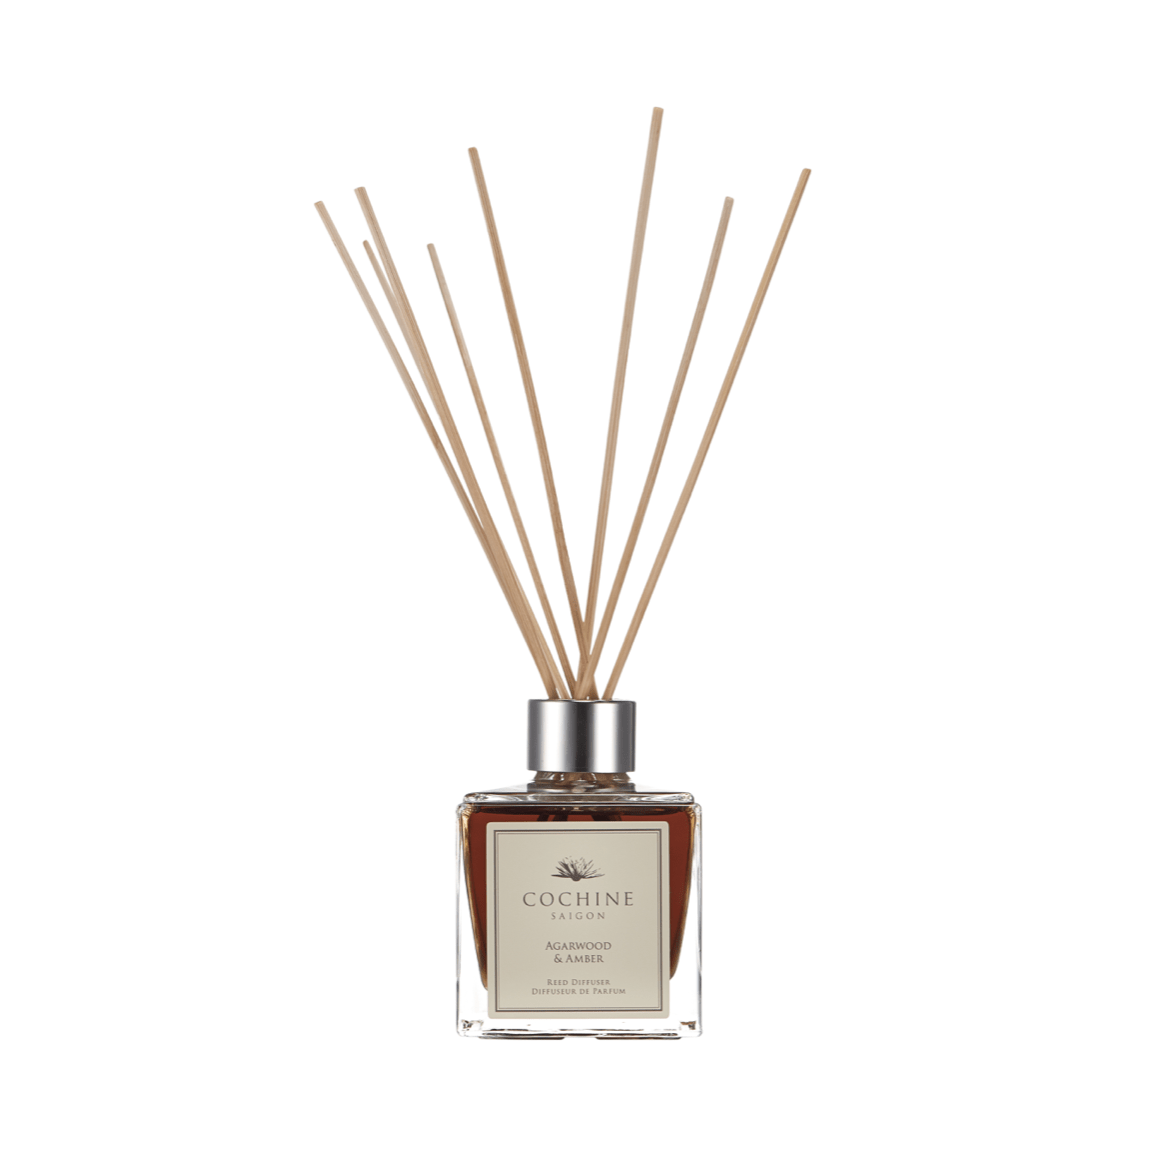 Cochine Home Fragrances of Cochines luxury scented candles and Cochine reed diffuers in Cochine Agarwood & Amber Diffuser